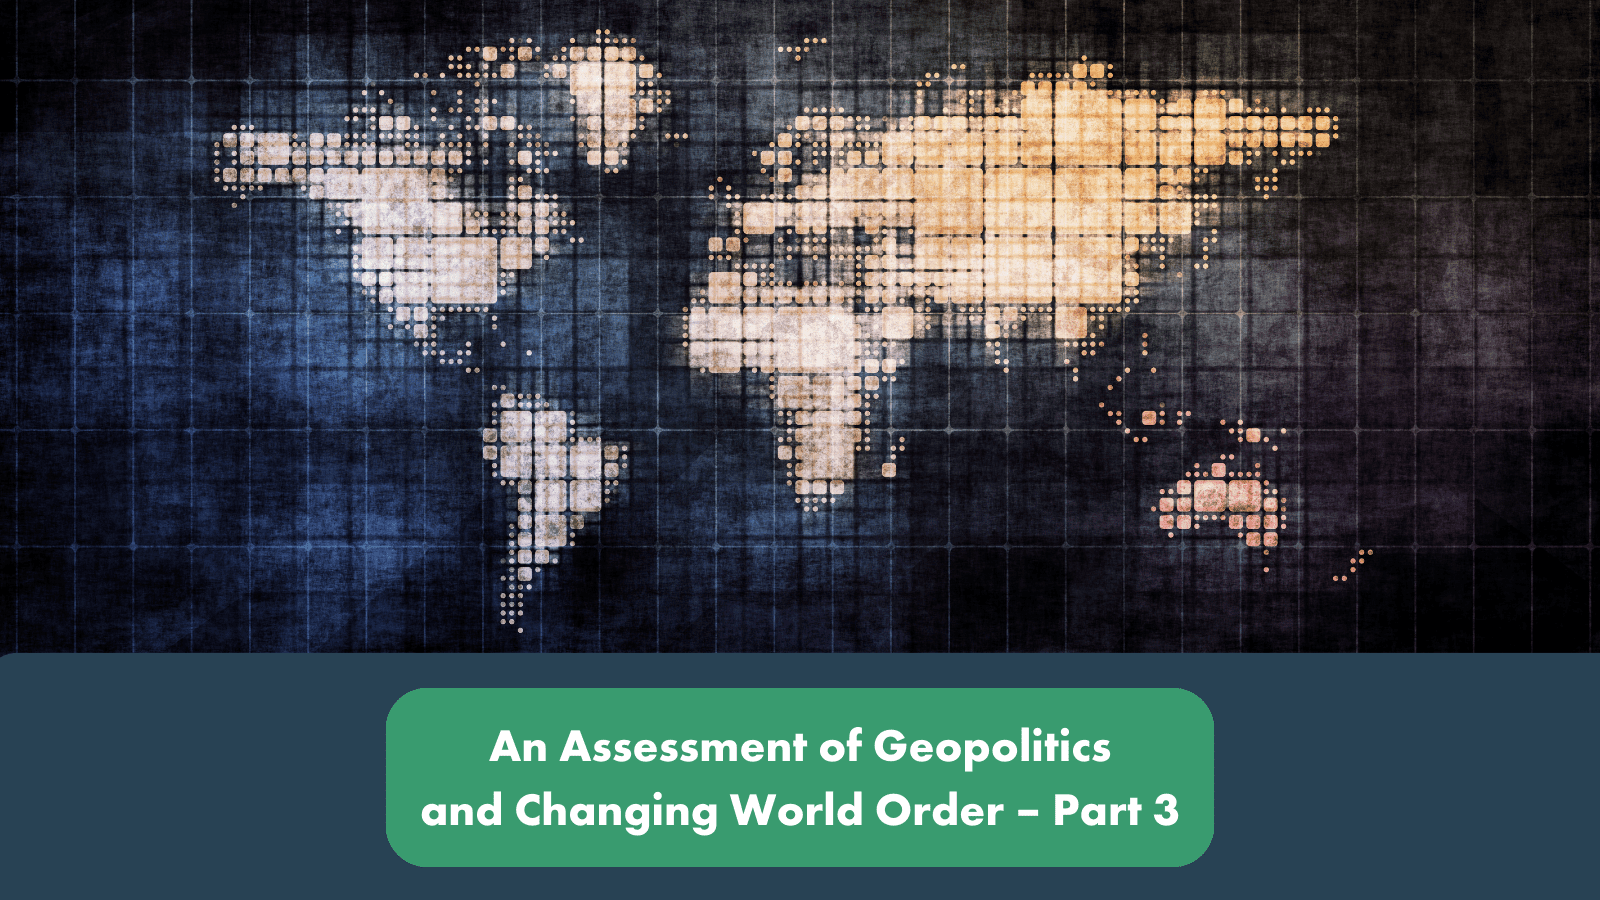 An Assessment of Geopolitics and Changing World Order – Part 3